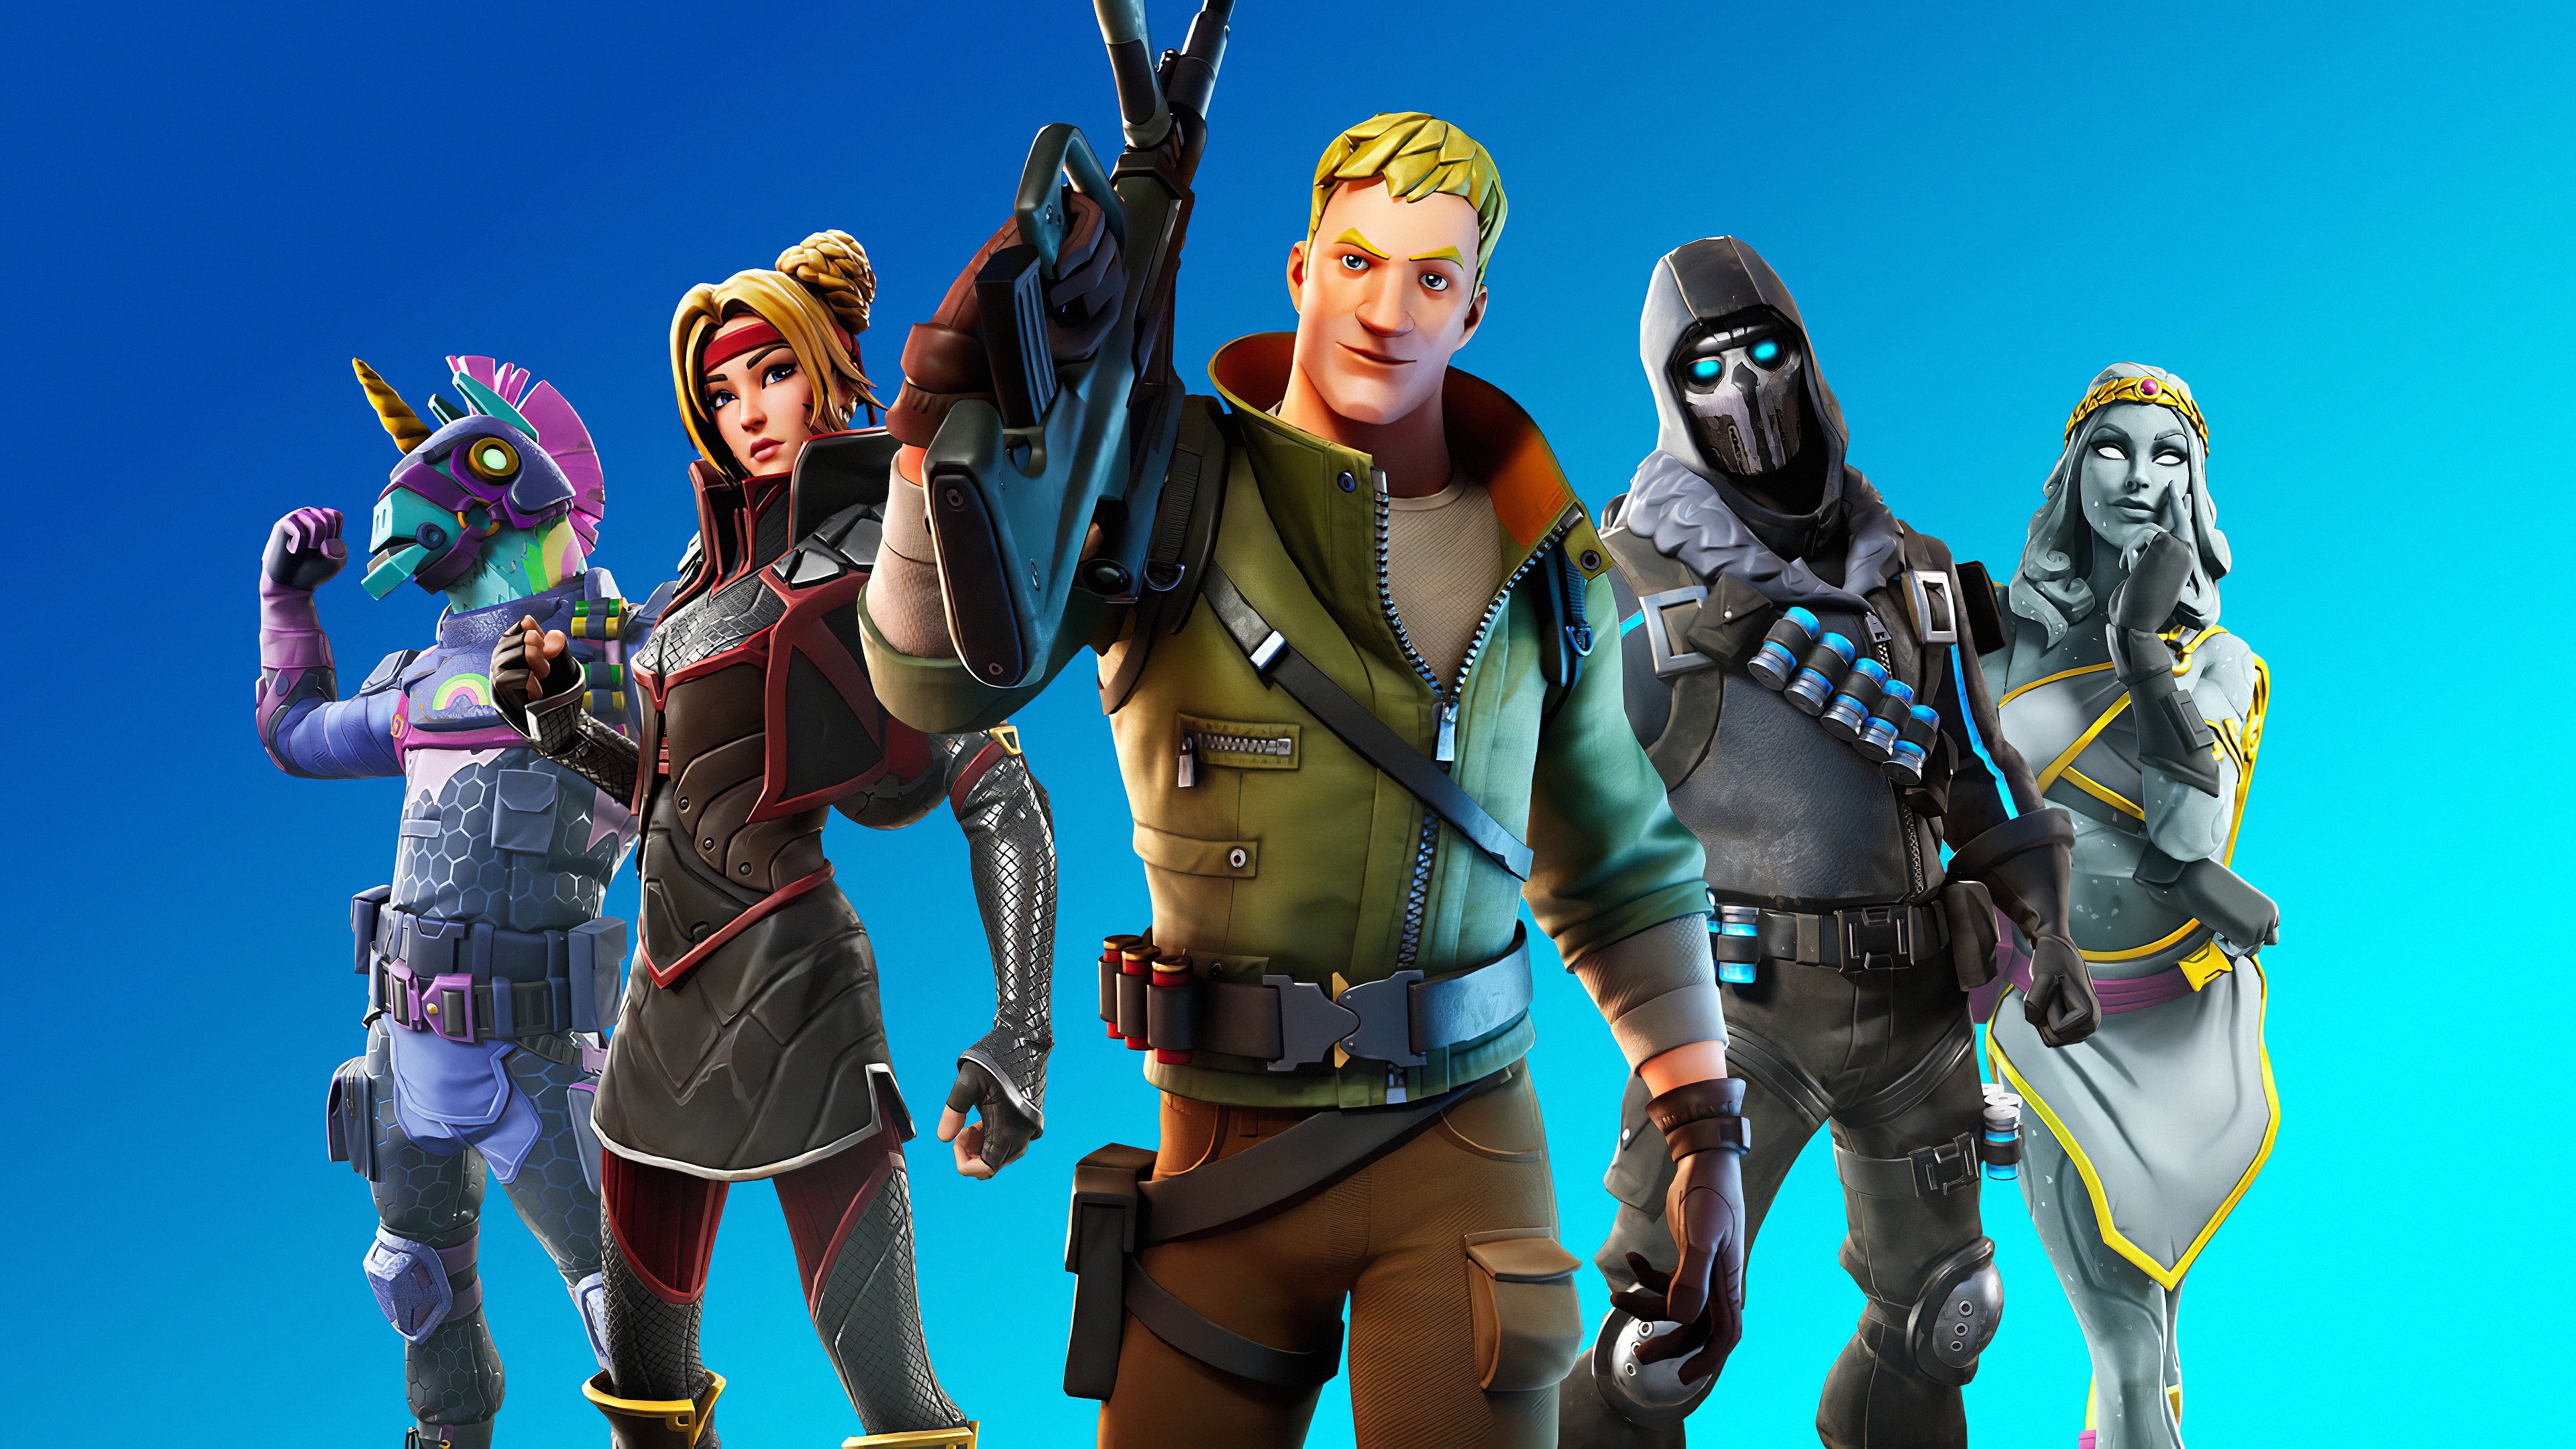 Fortnite Group Wallpaper, HD Games 4K Wallpapers, Images, Photos and